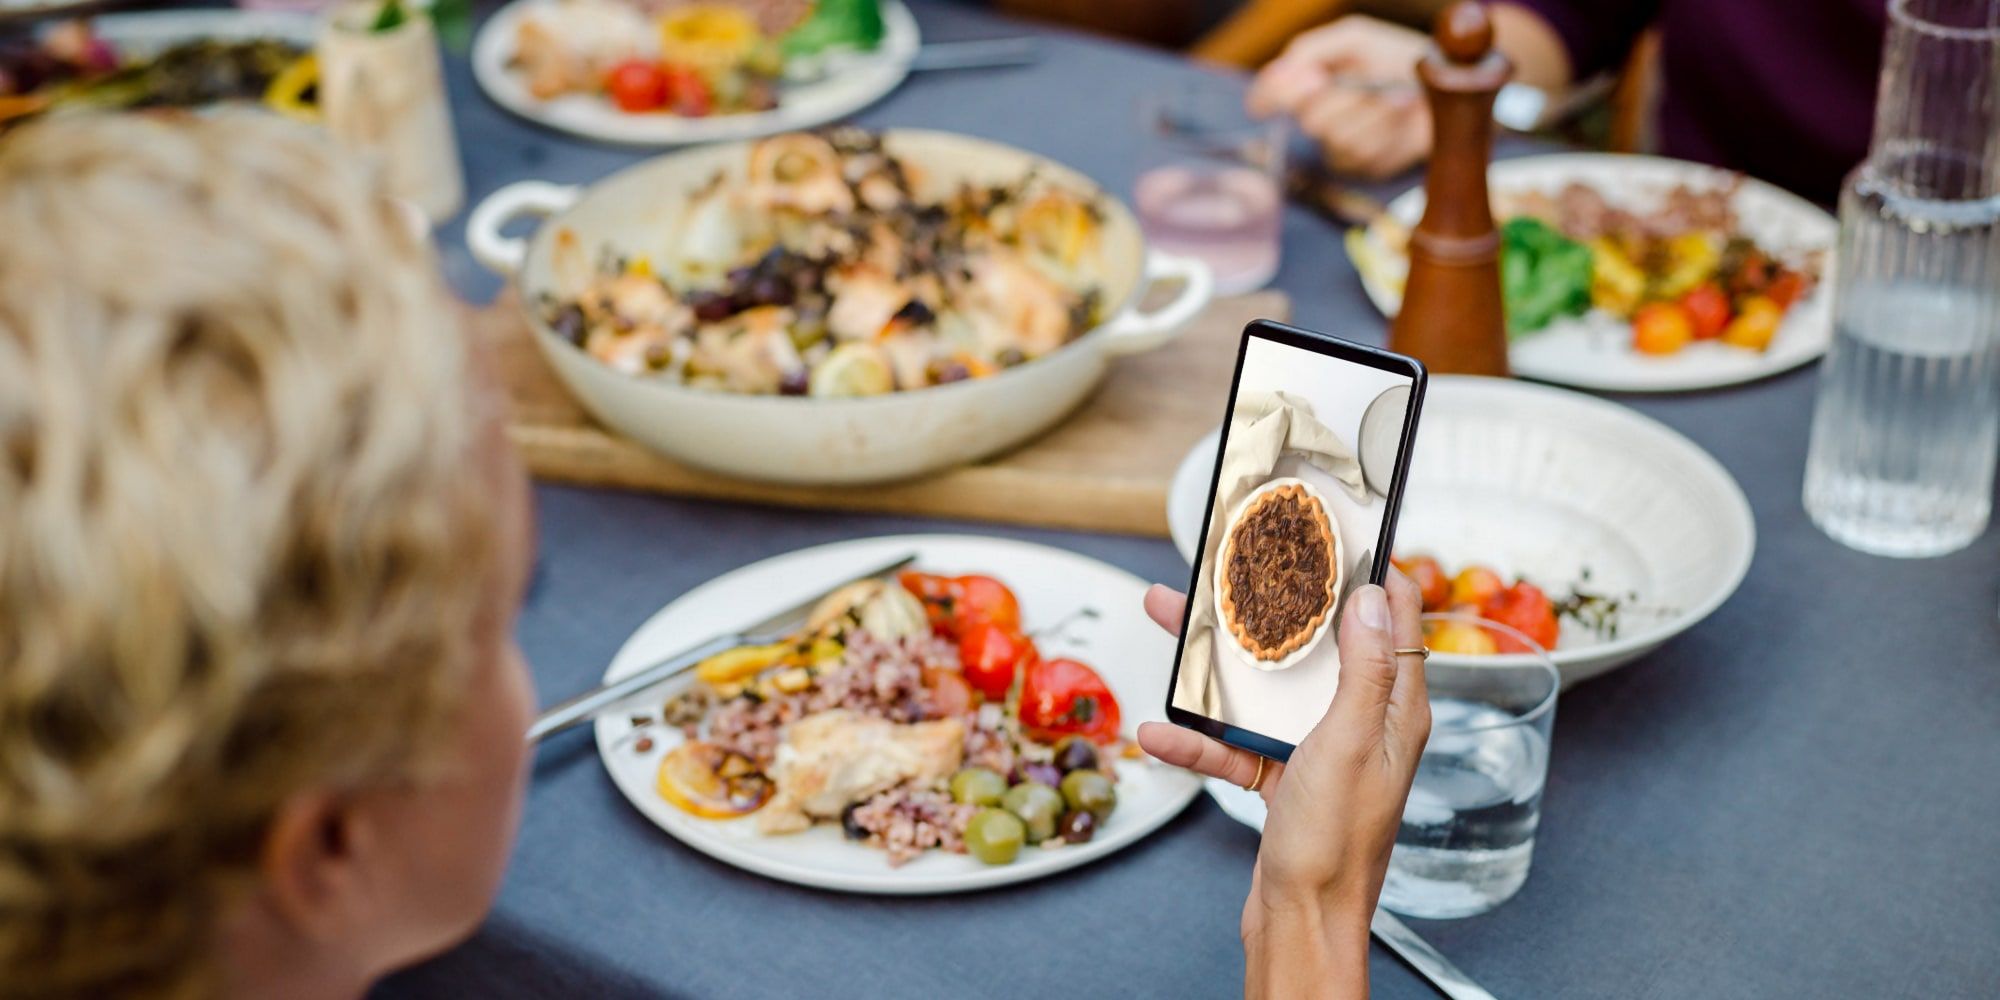 Holiday Meal Photo From Google Blog With a Smartphone Being Held In The Scene